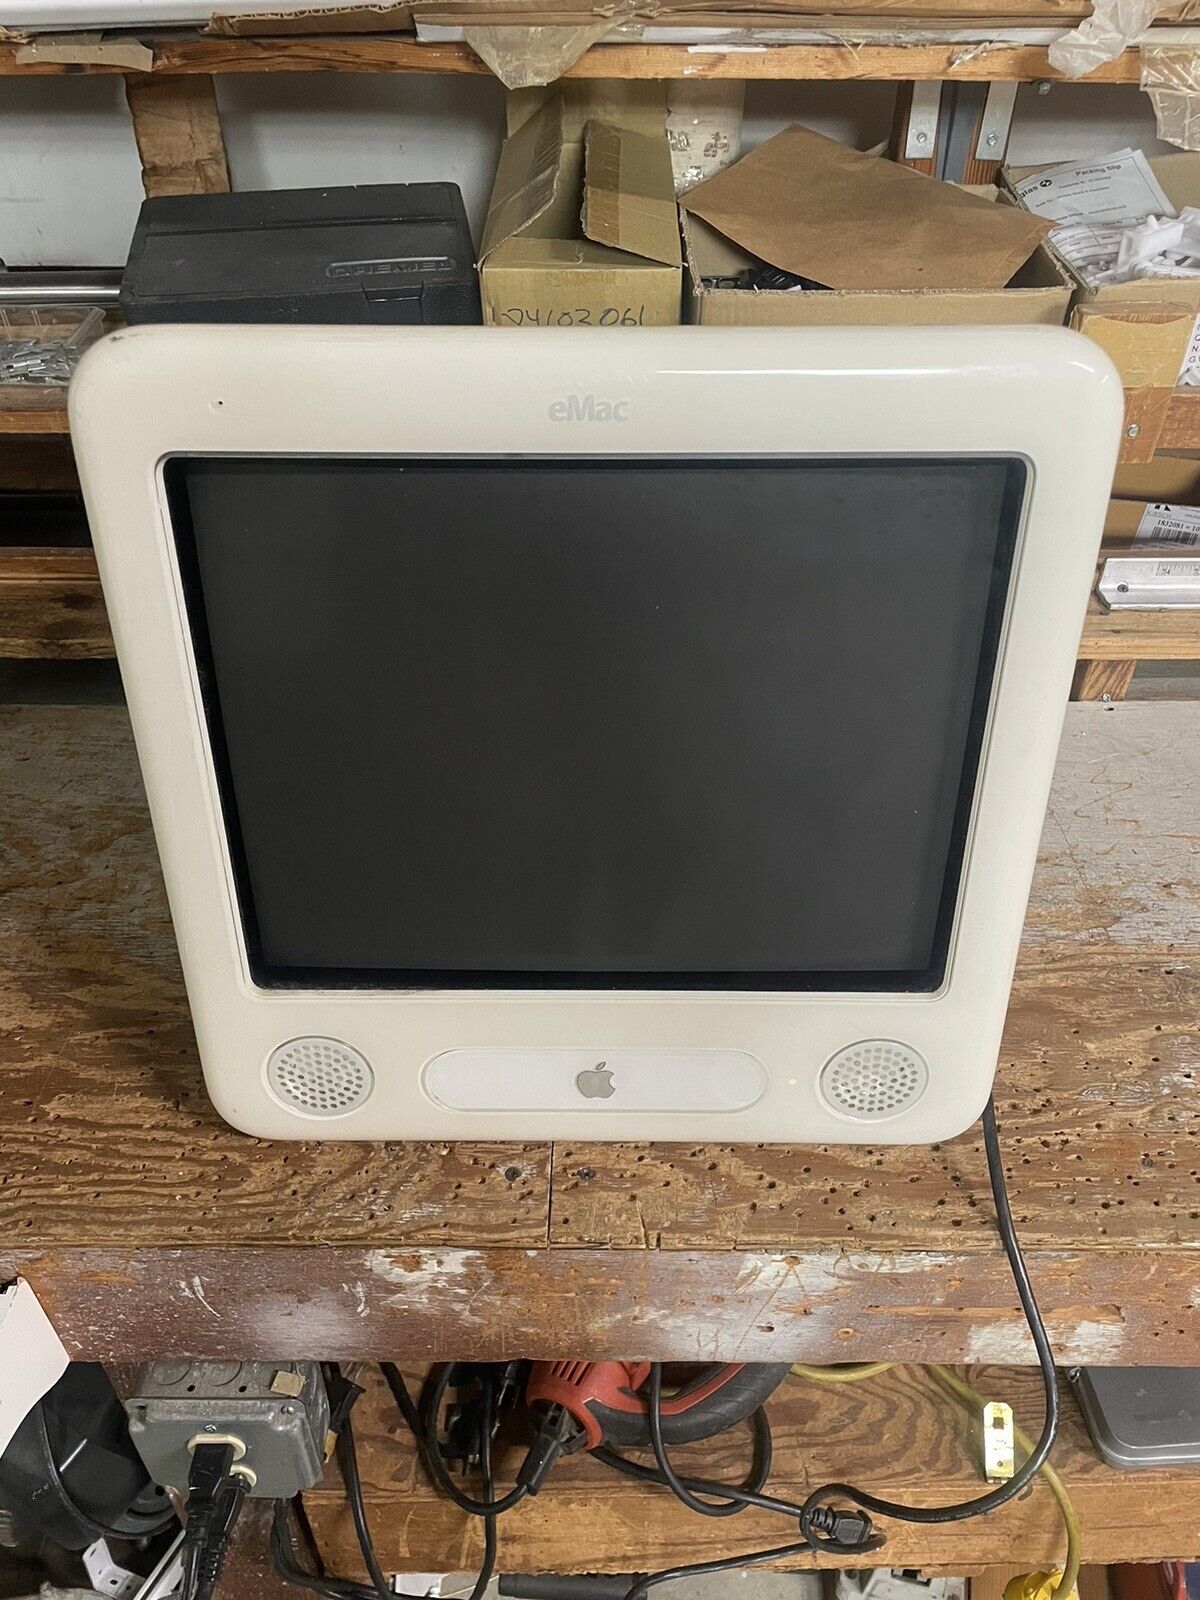 Vintage Apple eMac A1002 All in One Desktop Power PC Computer - Parts Read